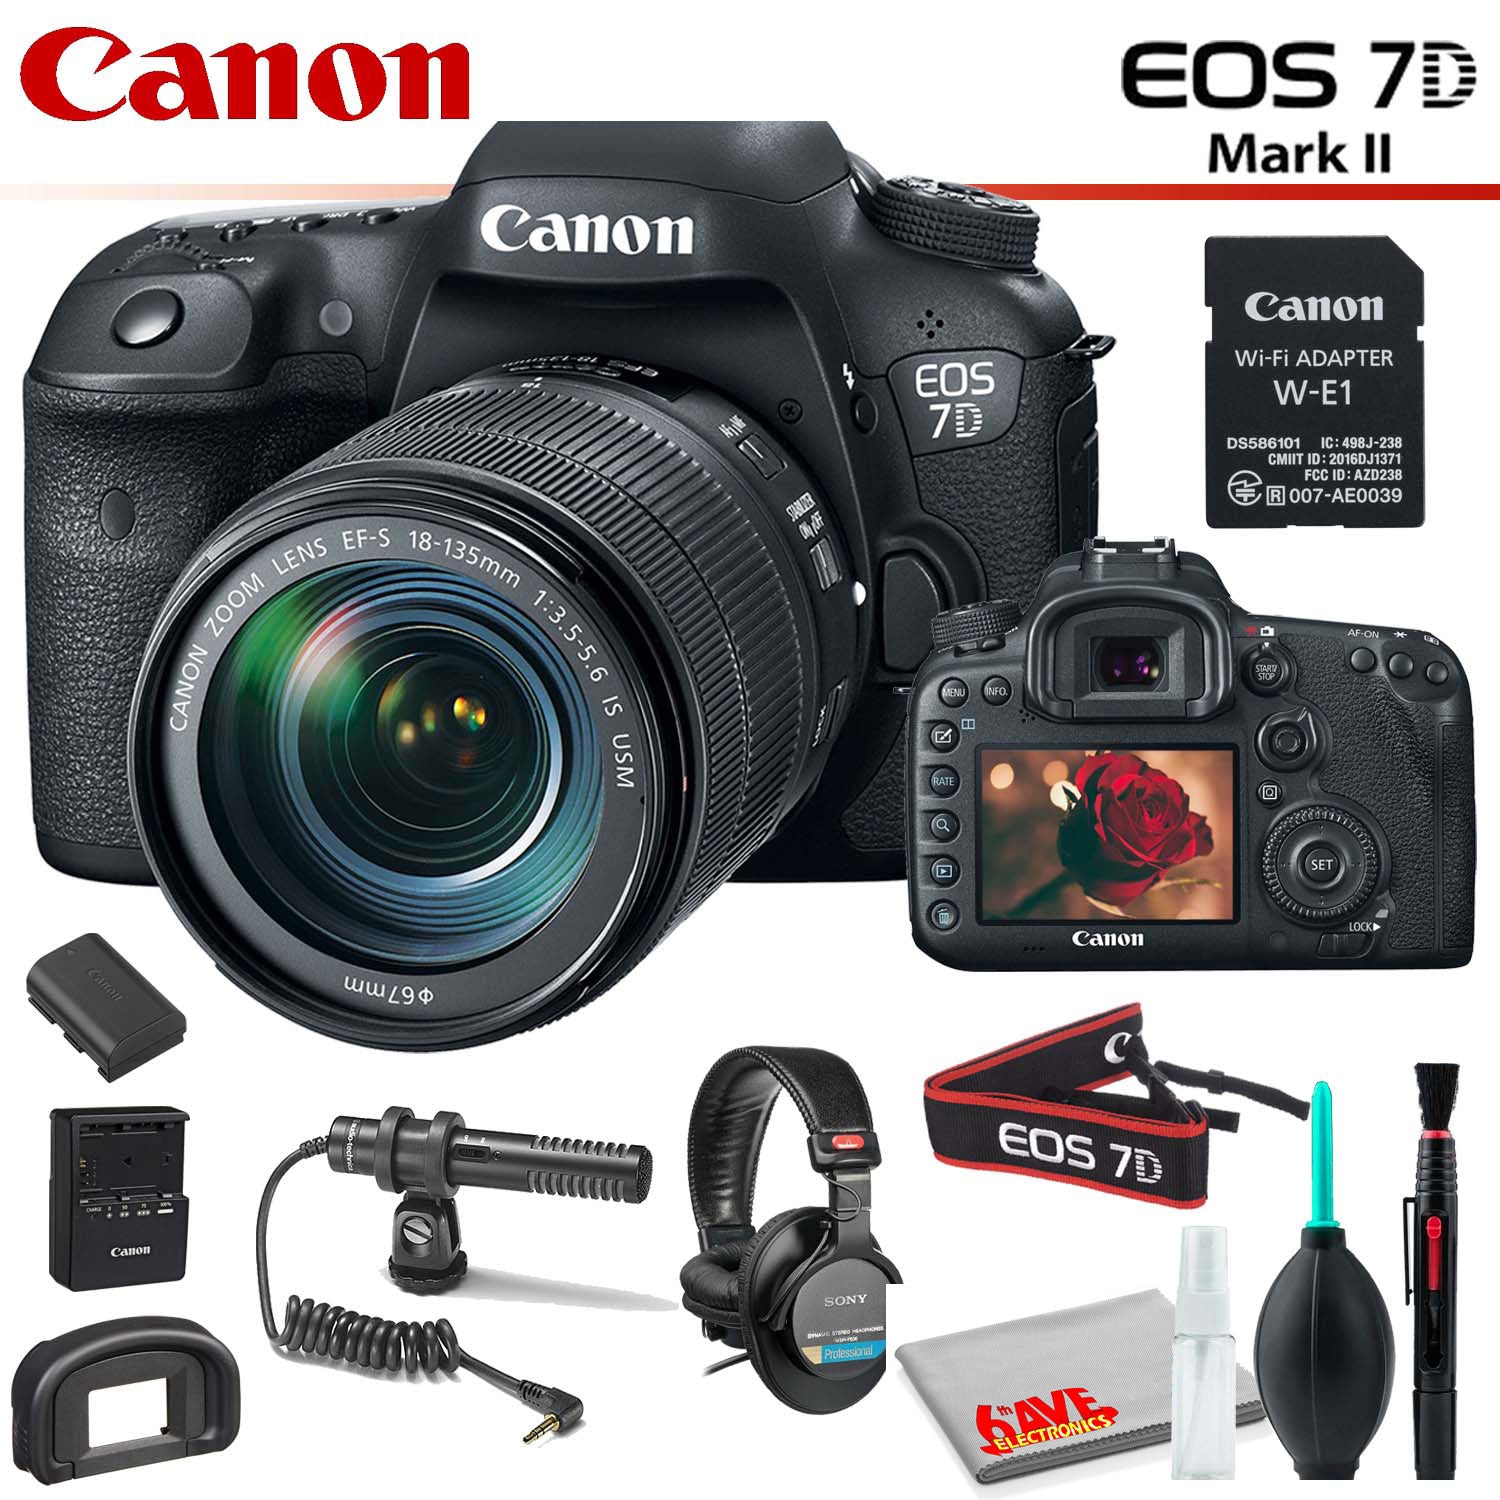 Canon EOS 7D Mark II DSLR Camera (Intl Model) with 18-135mm Lens & W-E1 Wi-Fi Adapter With Studio Headphones